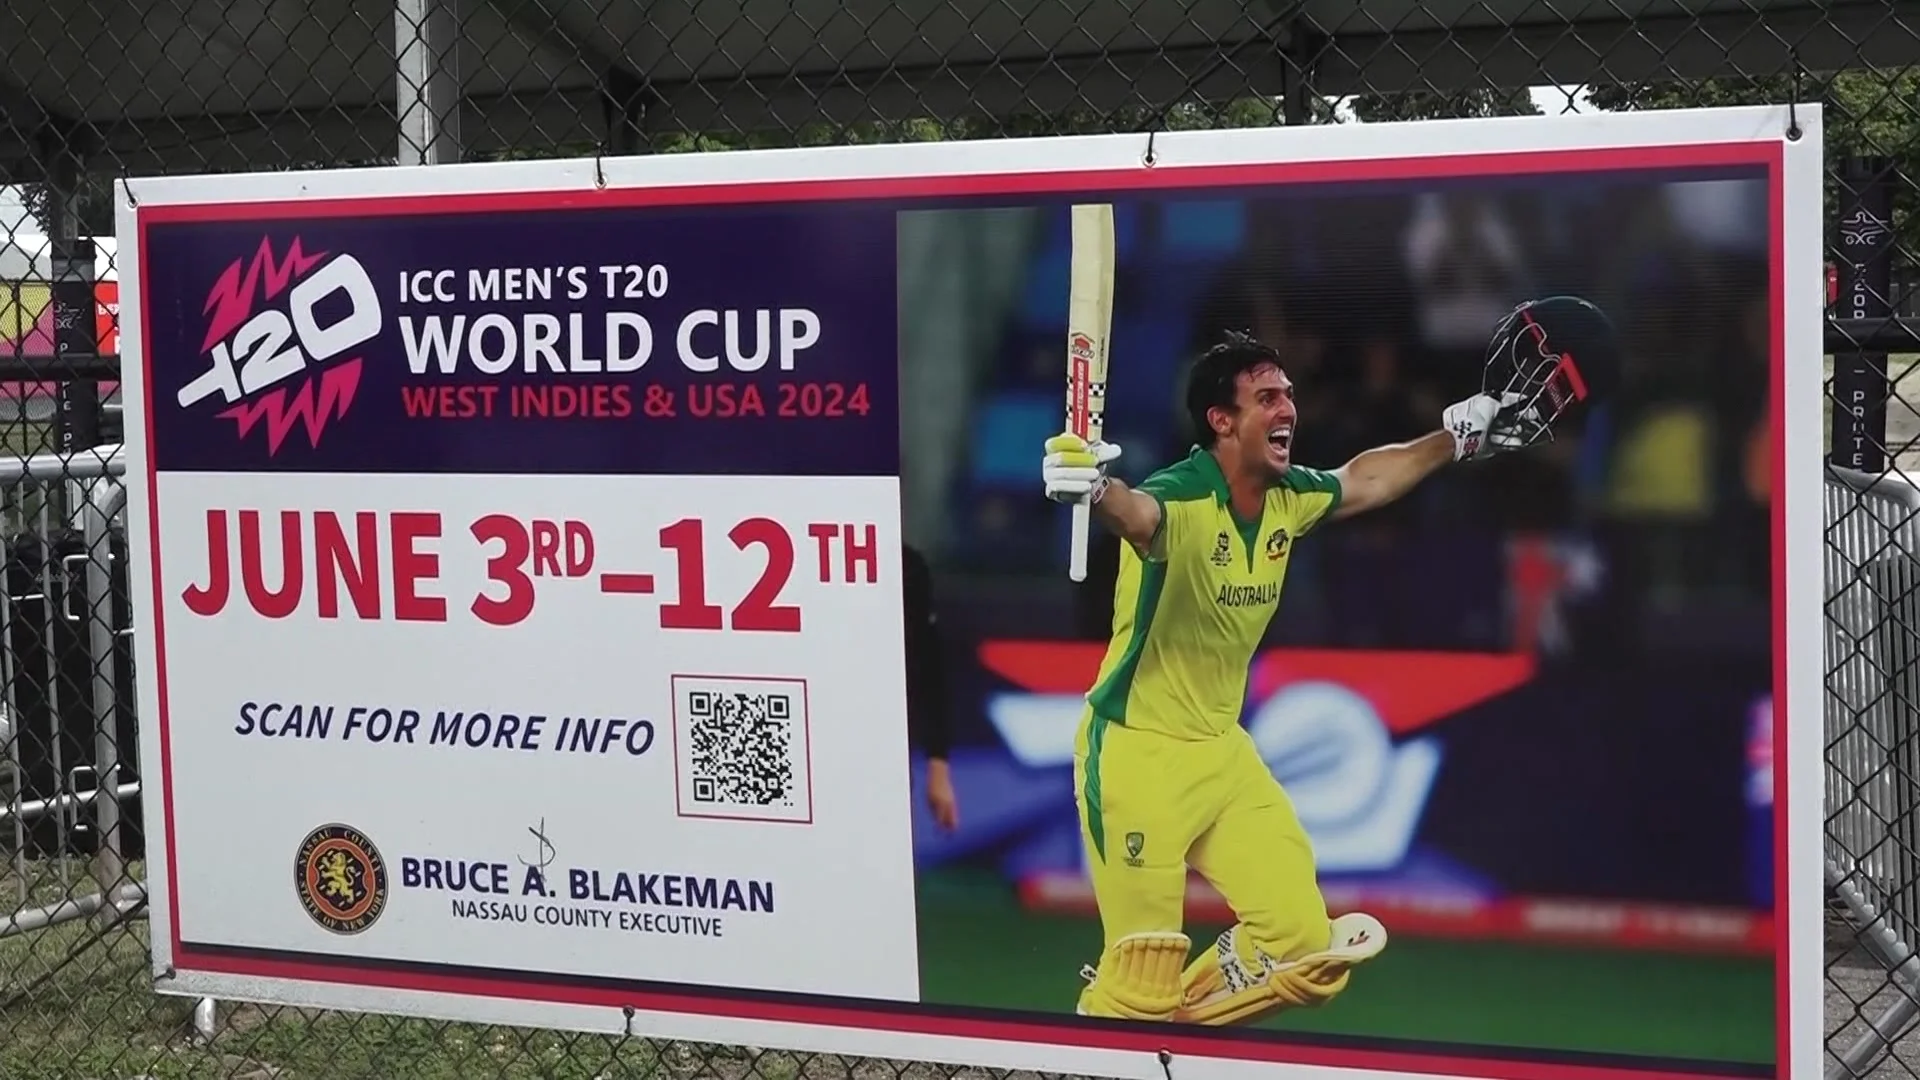 Police: Maryland man arrested for running on to field at Cricket World Cup